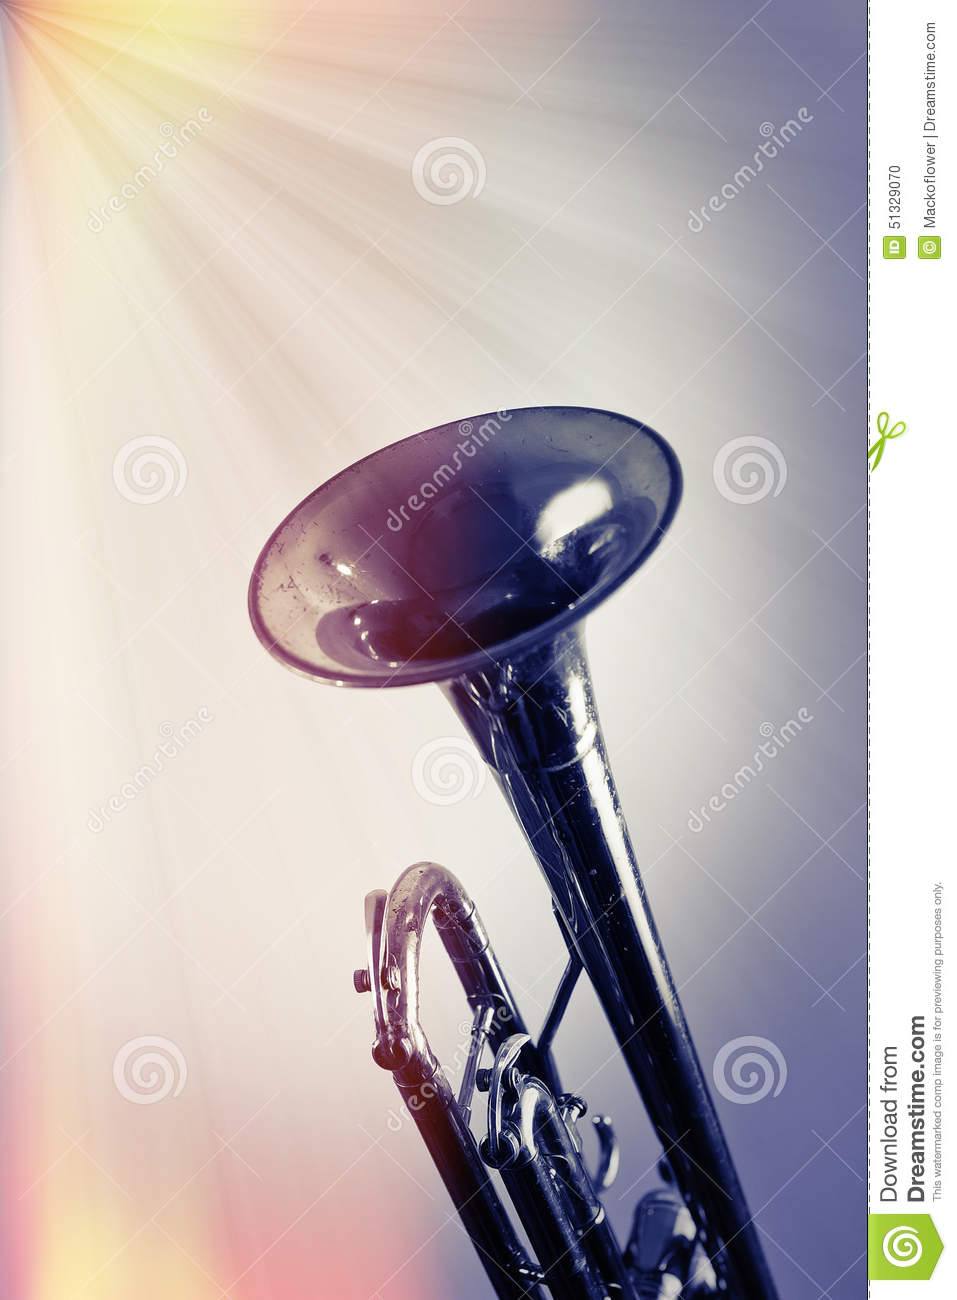 Trumpet In Stylized Monochrome Image With Majestic Beams Of Light 